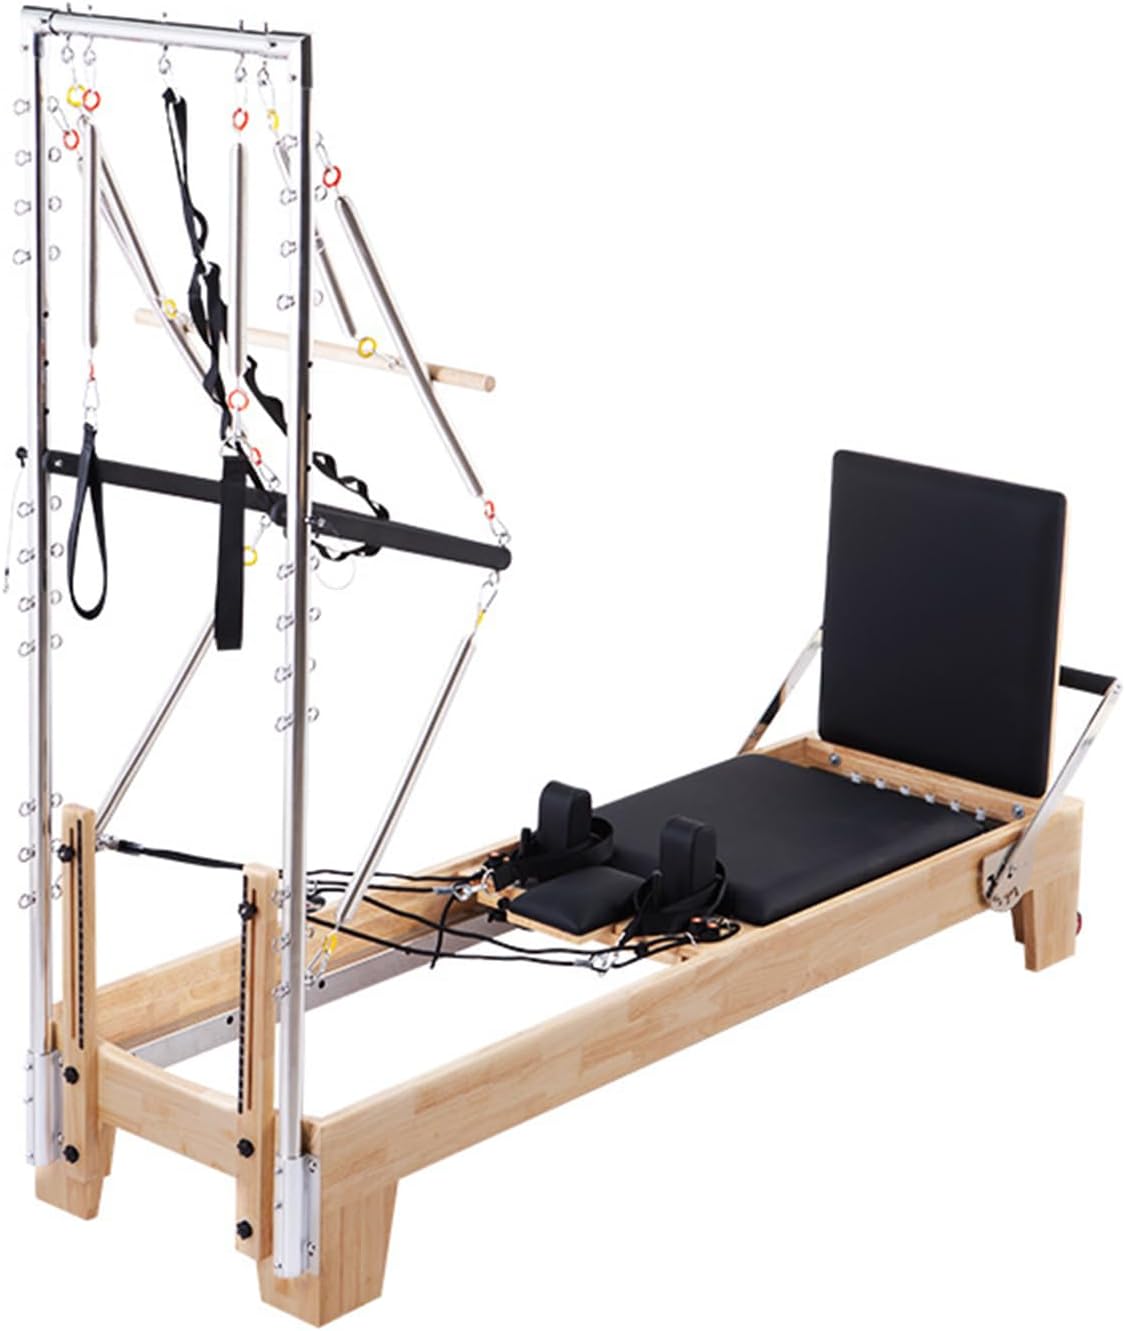 Nano Pro Half Trapeze - Studio Pilates Reformer with Tower - Oak Wood - Personal Hour for Yoga and Meditations